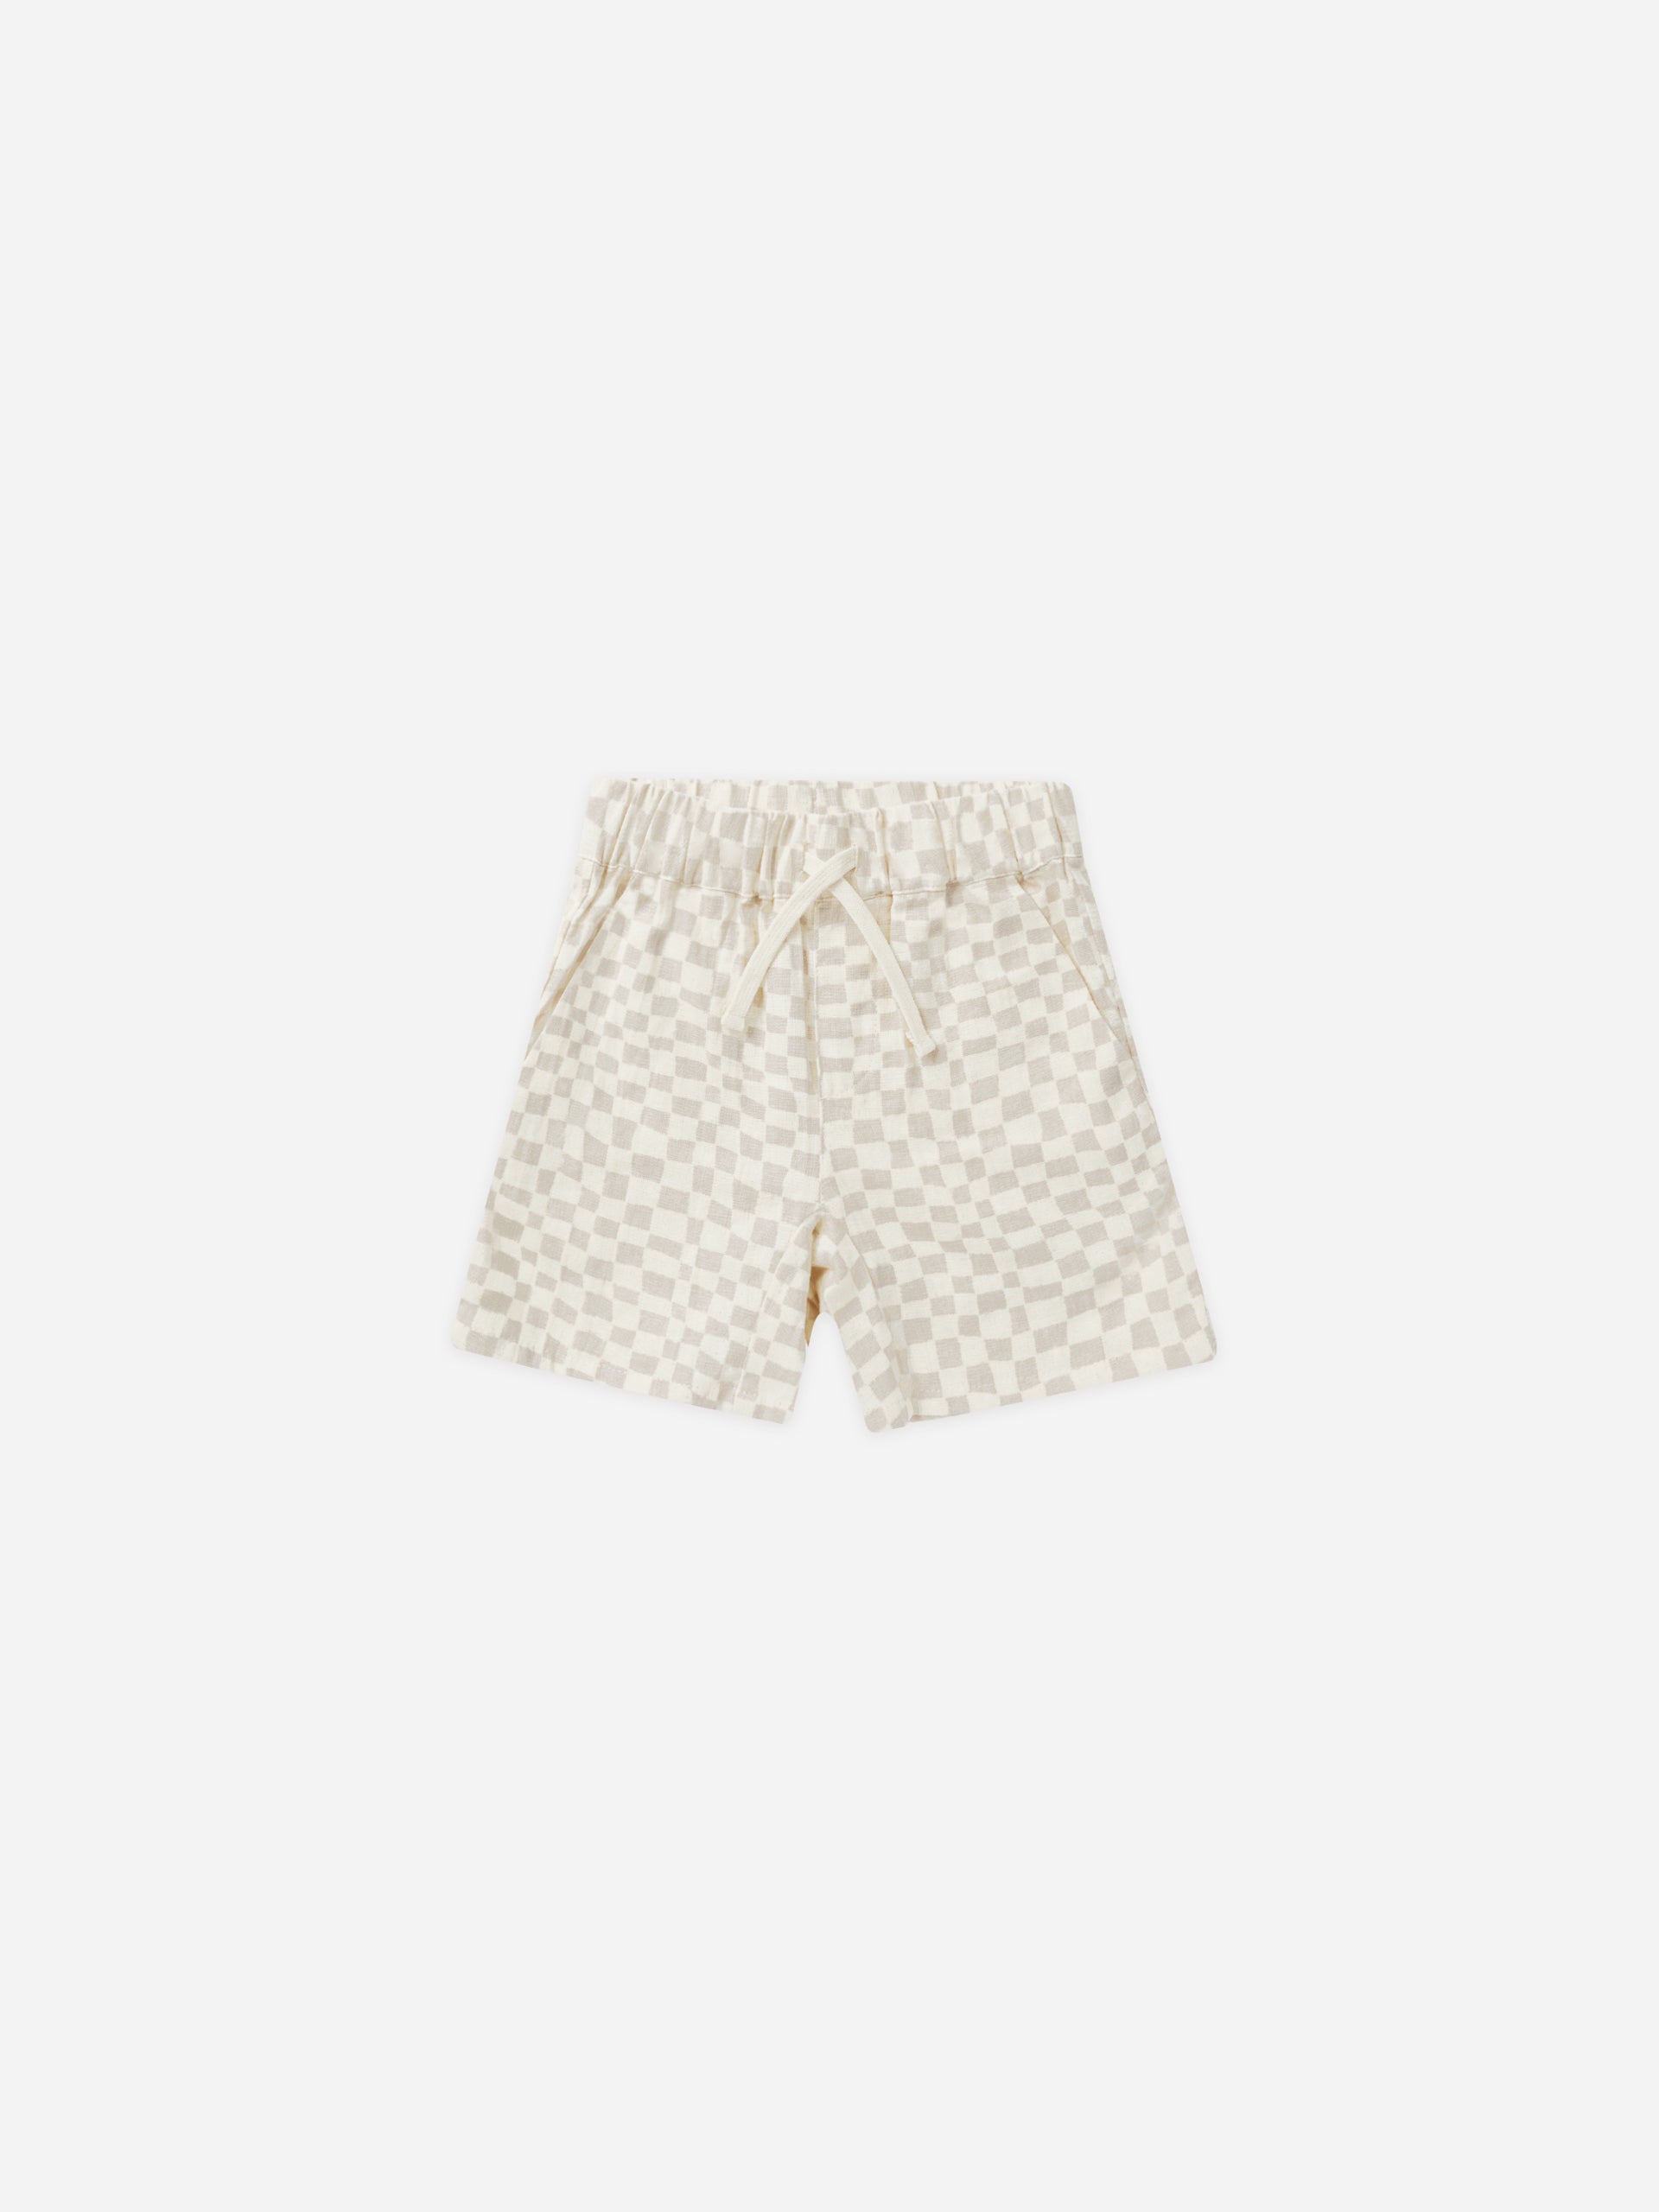 Bermuda Short || Dove Check - Rylee + Cru | Kids Clothes | Trendy Baby Clothes | Modern Infant Outfits |